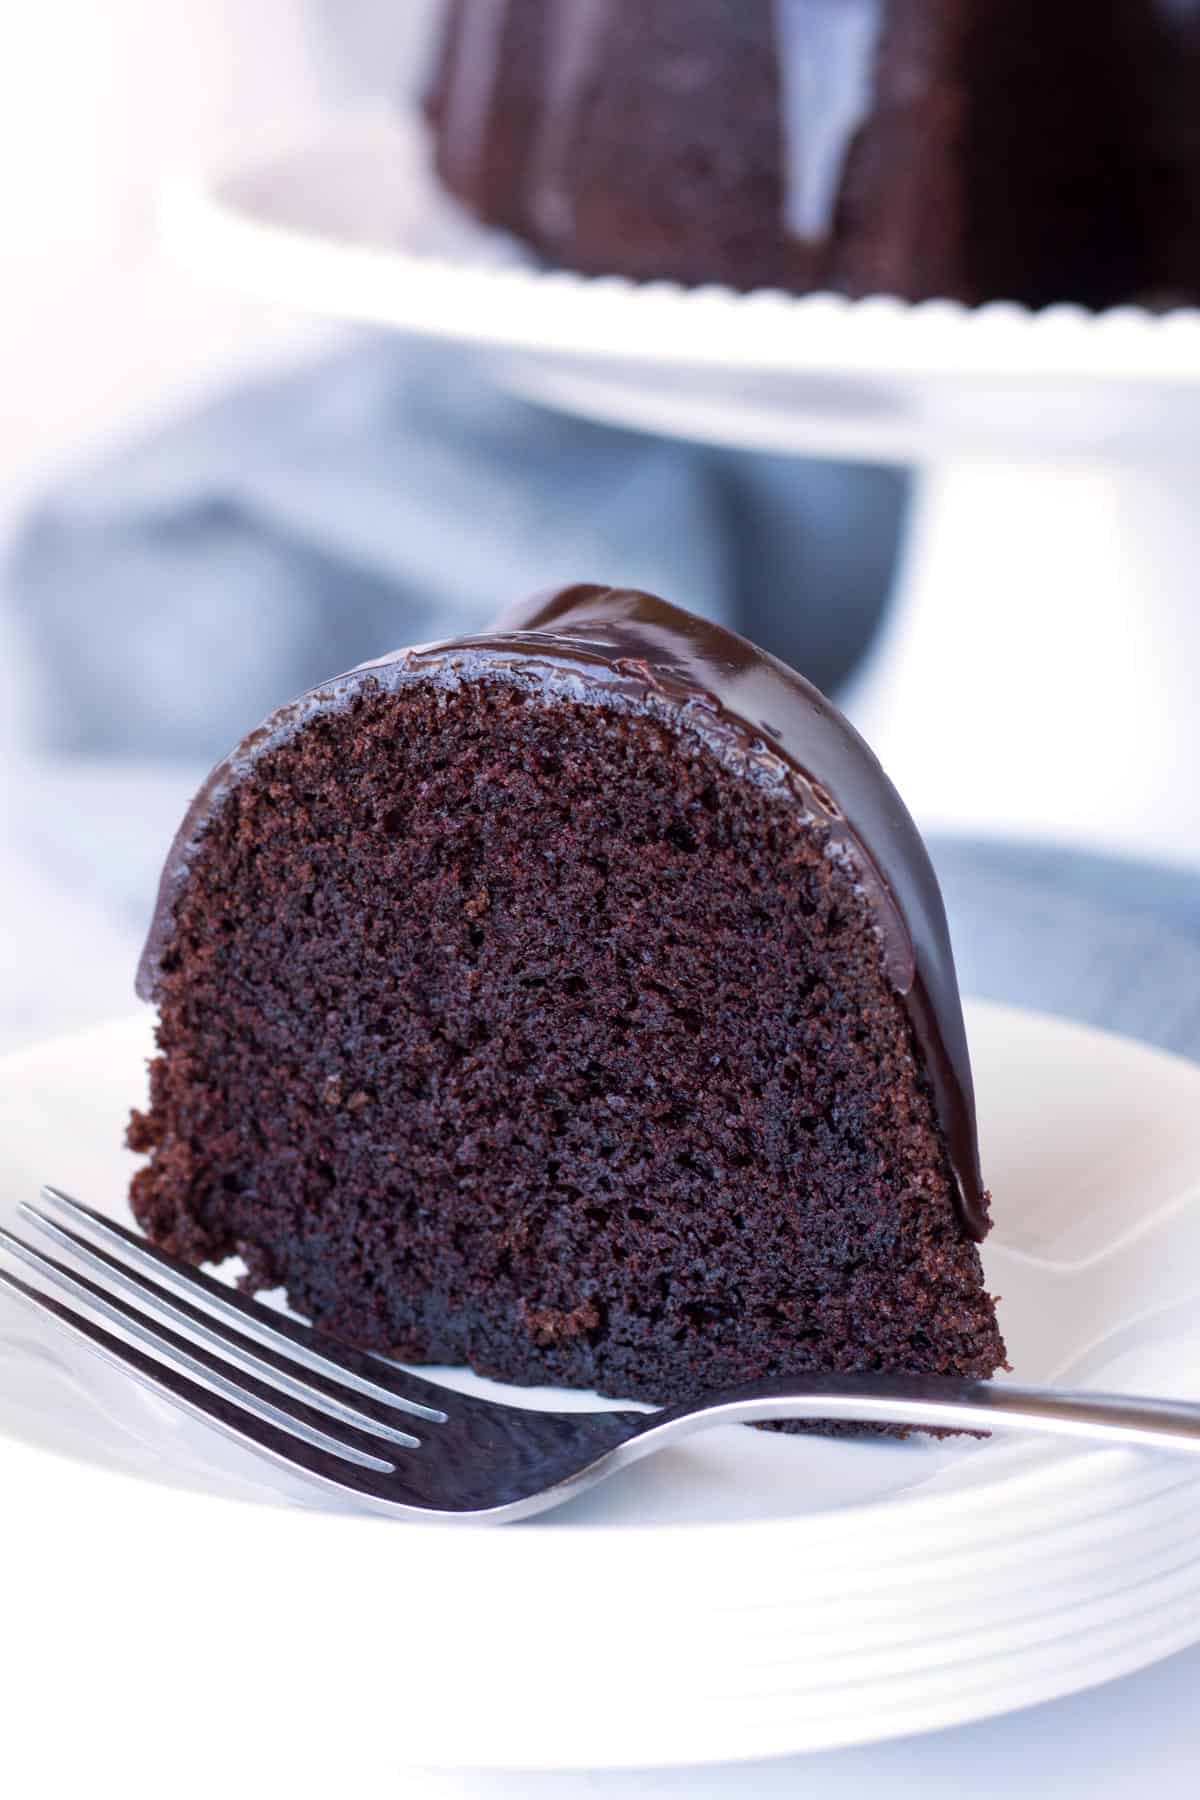 Slice of chocolate bundt cake on a stack of white plates with a silver fork sitting in front of the cake.